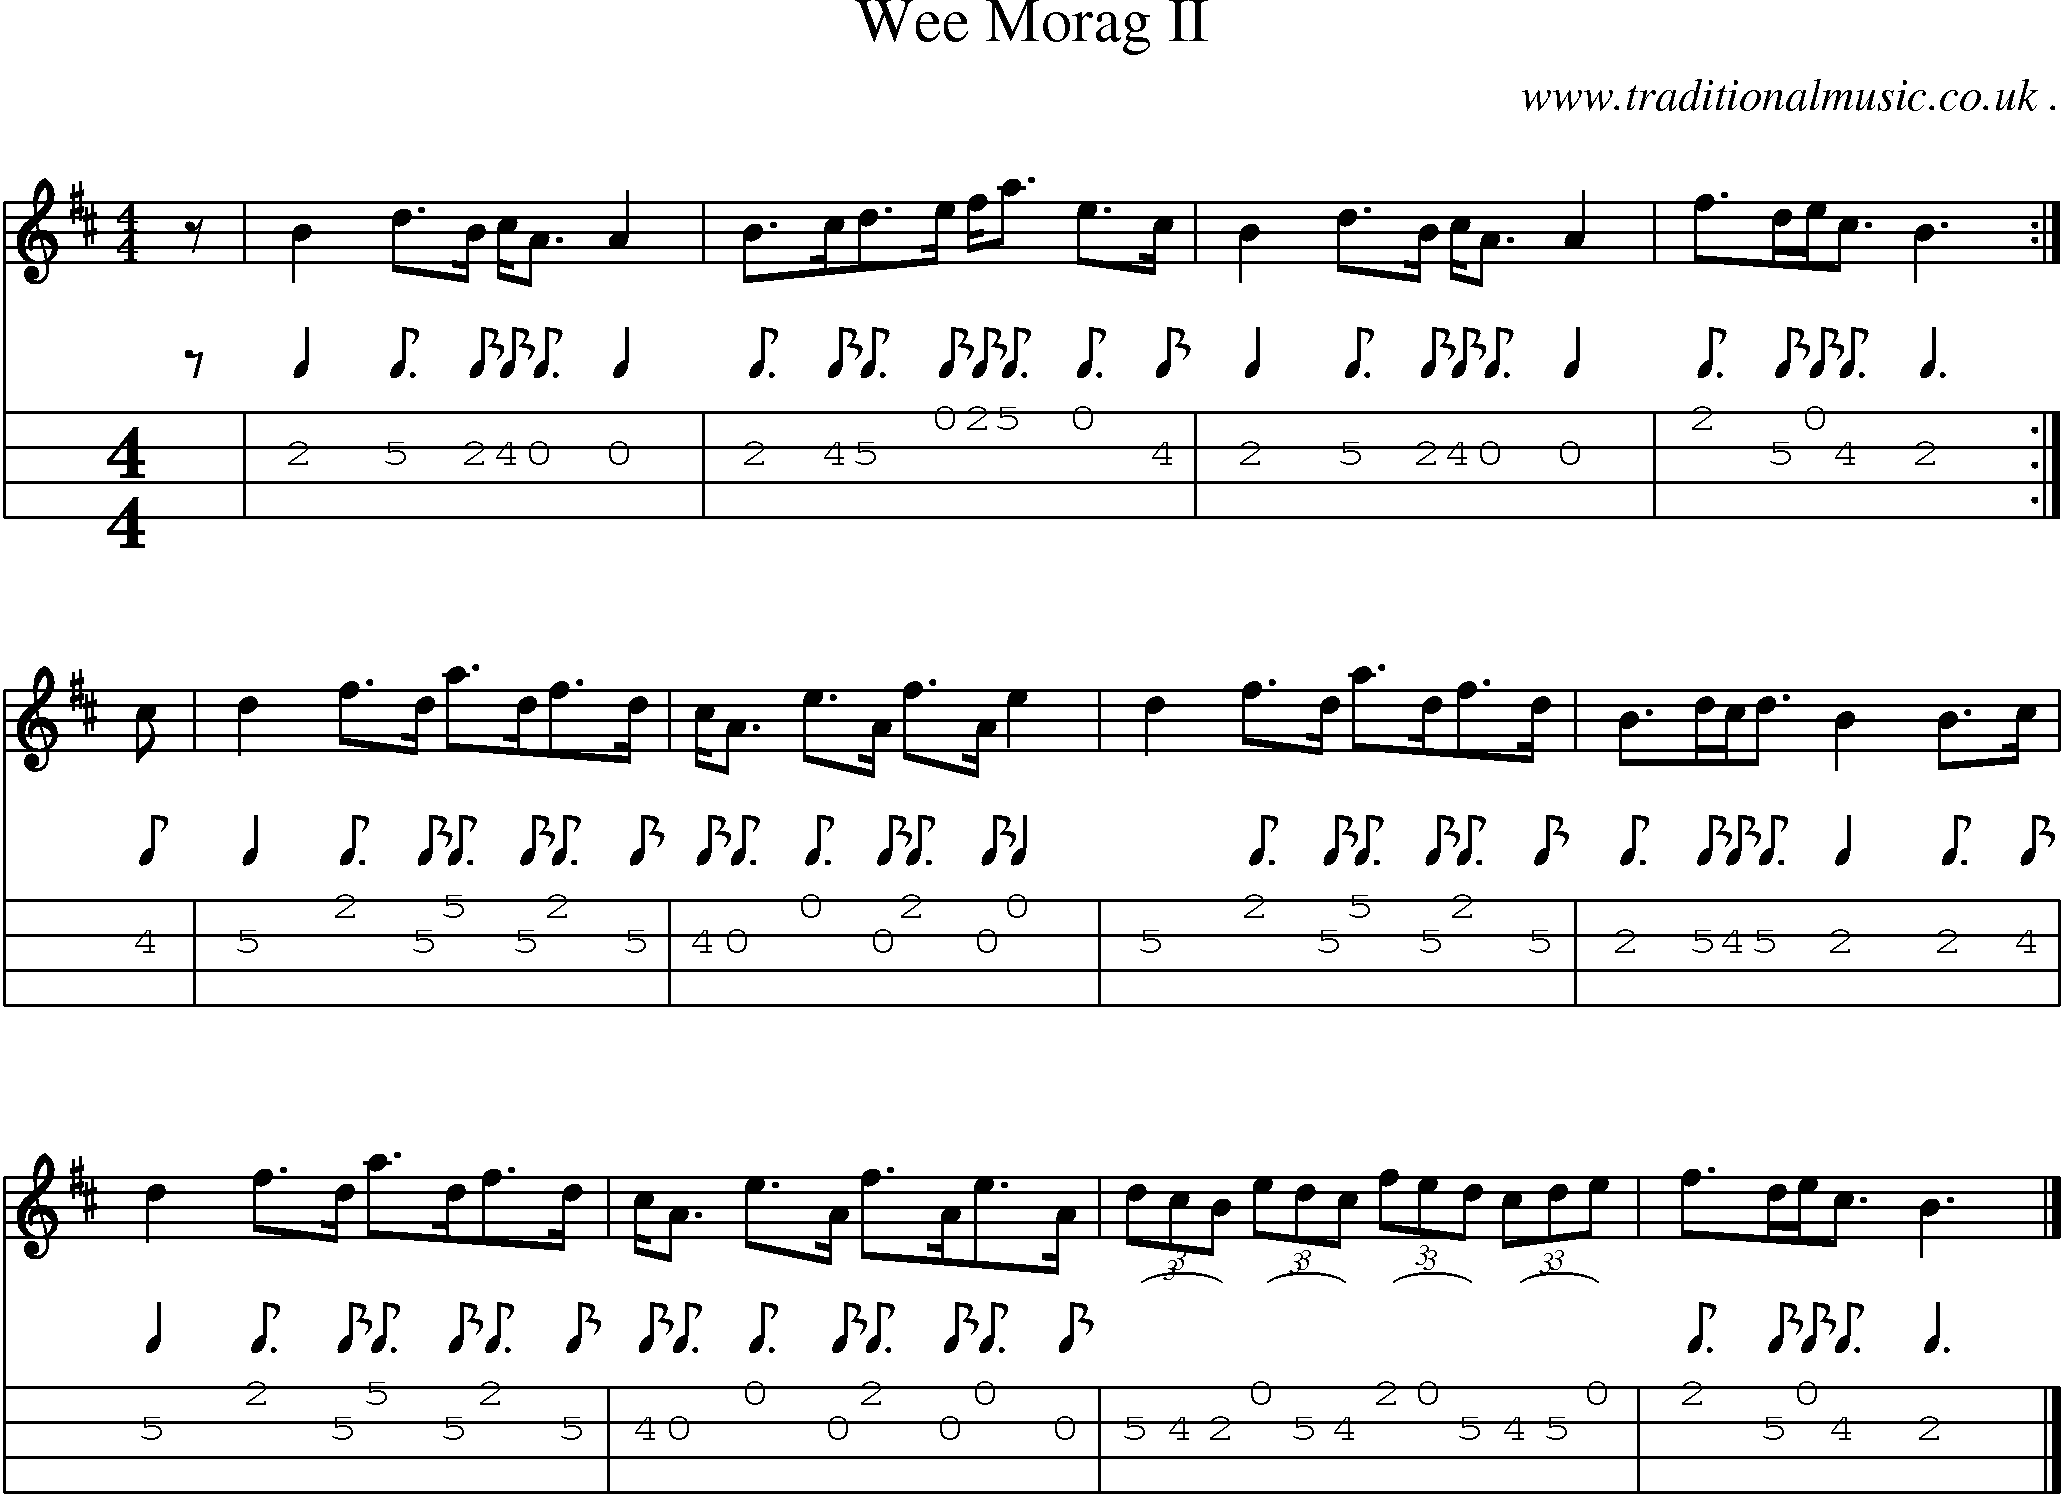 Sheet-music  score, Chords and Mandolin Tabs for Wee Morag Ii